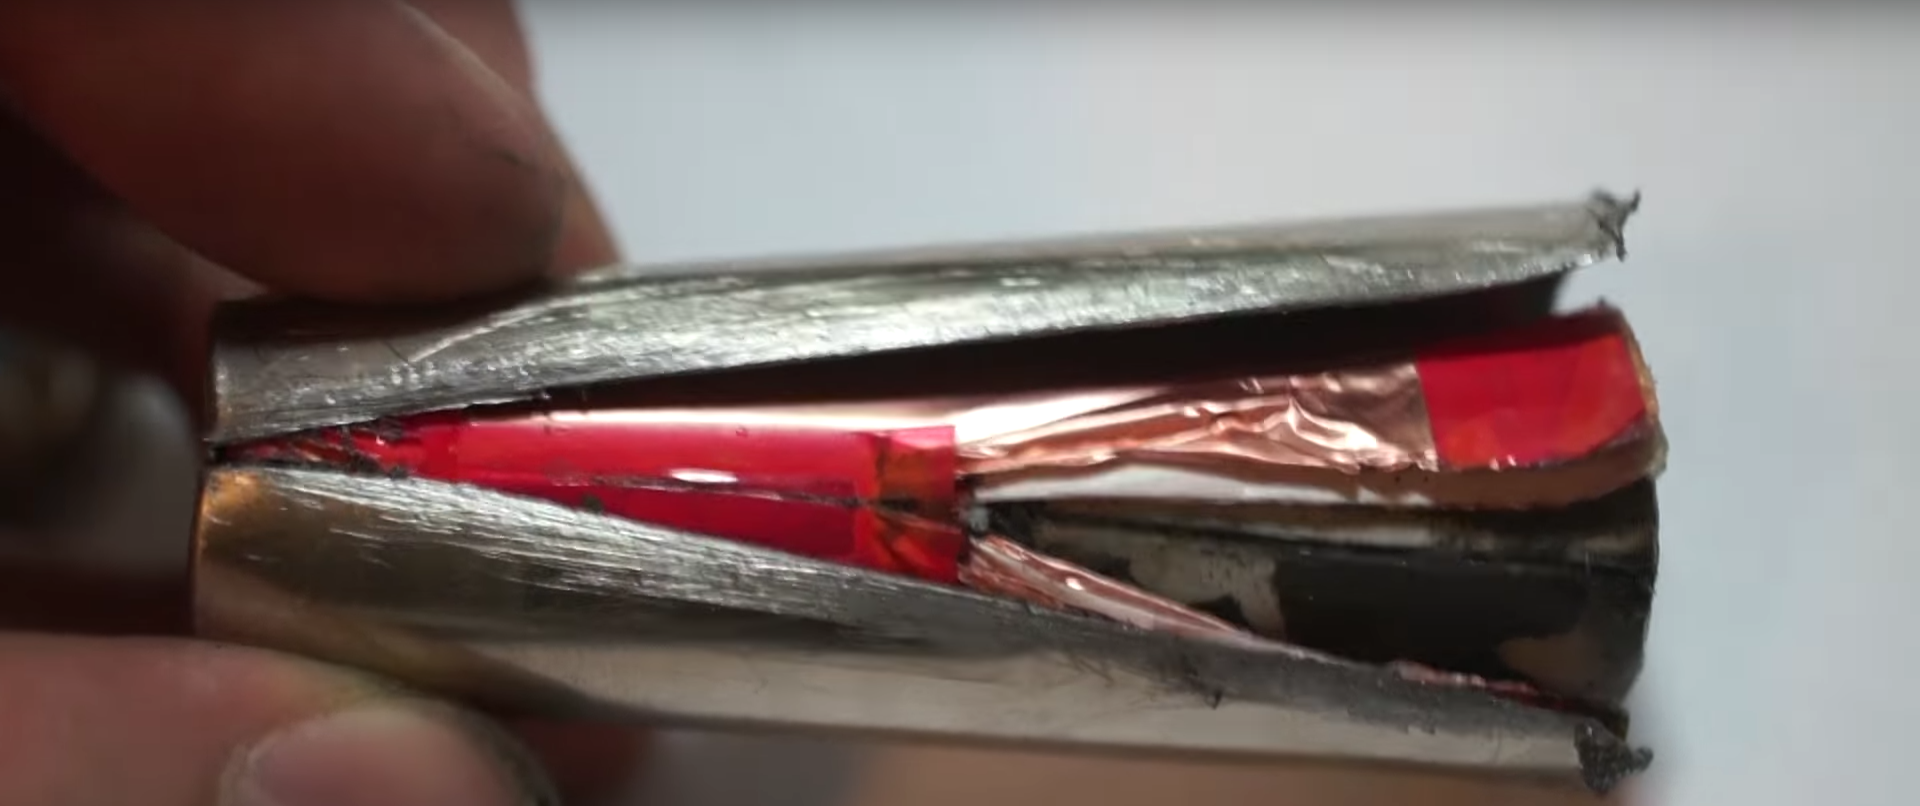 Tesla battery cell breakdown shows what is inside and difference with